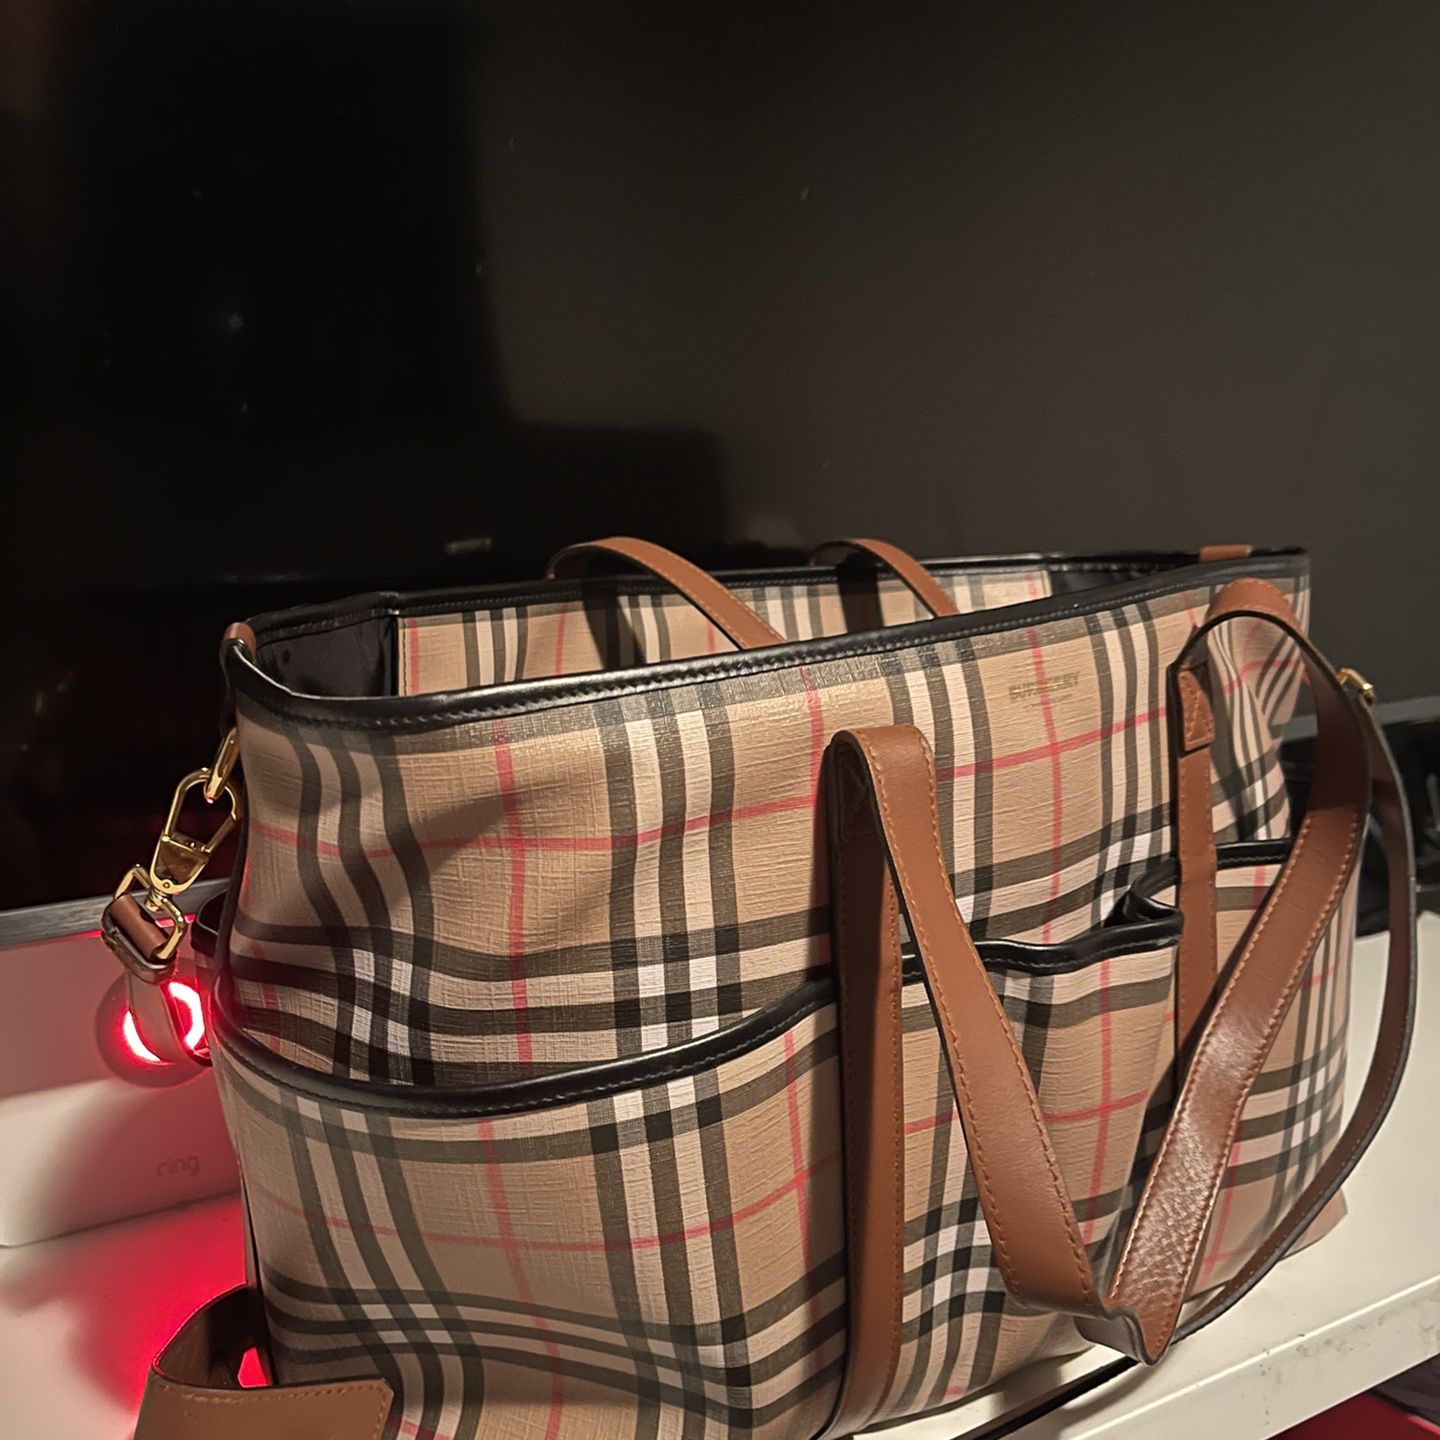 Burberry Diaper Bag Vintage Check for Sale in Los Angeles, CA - OfferUp